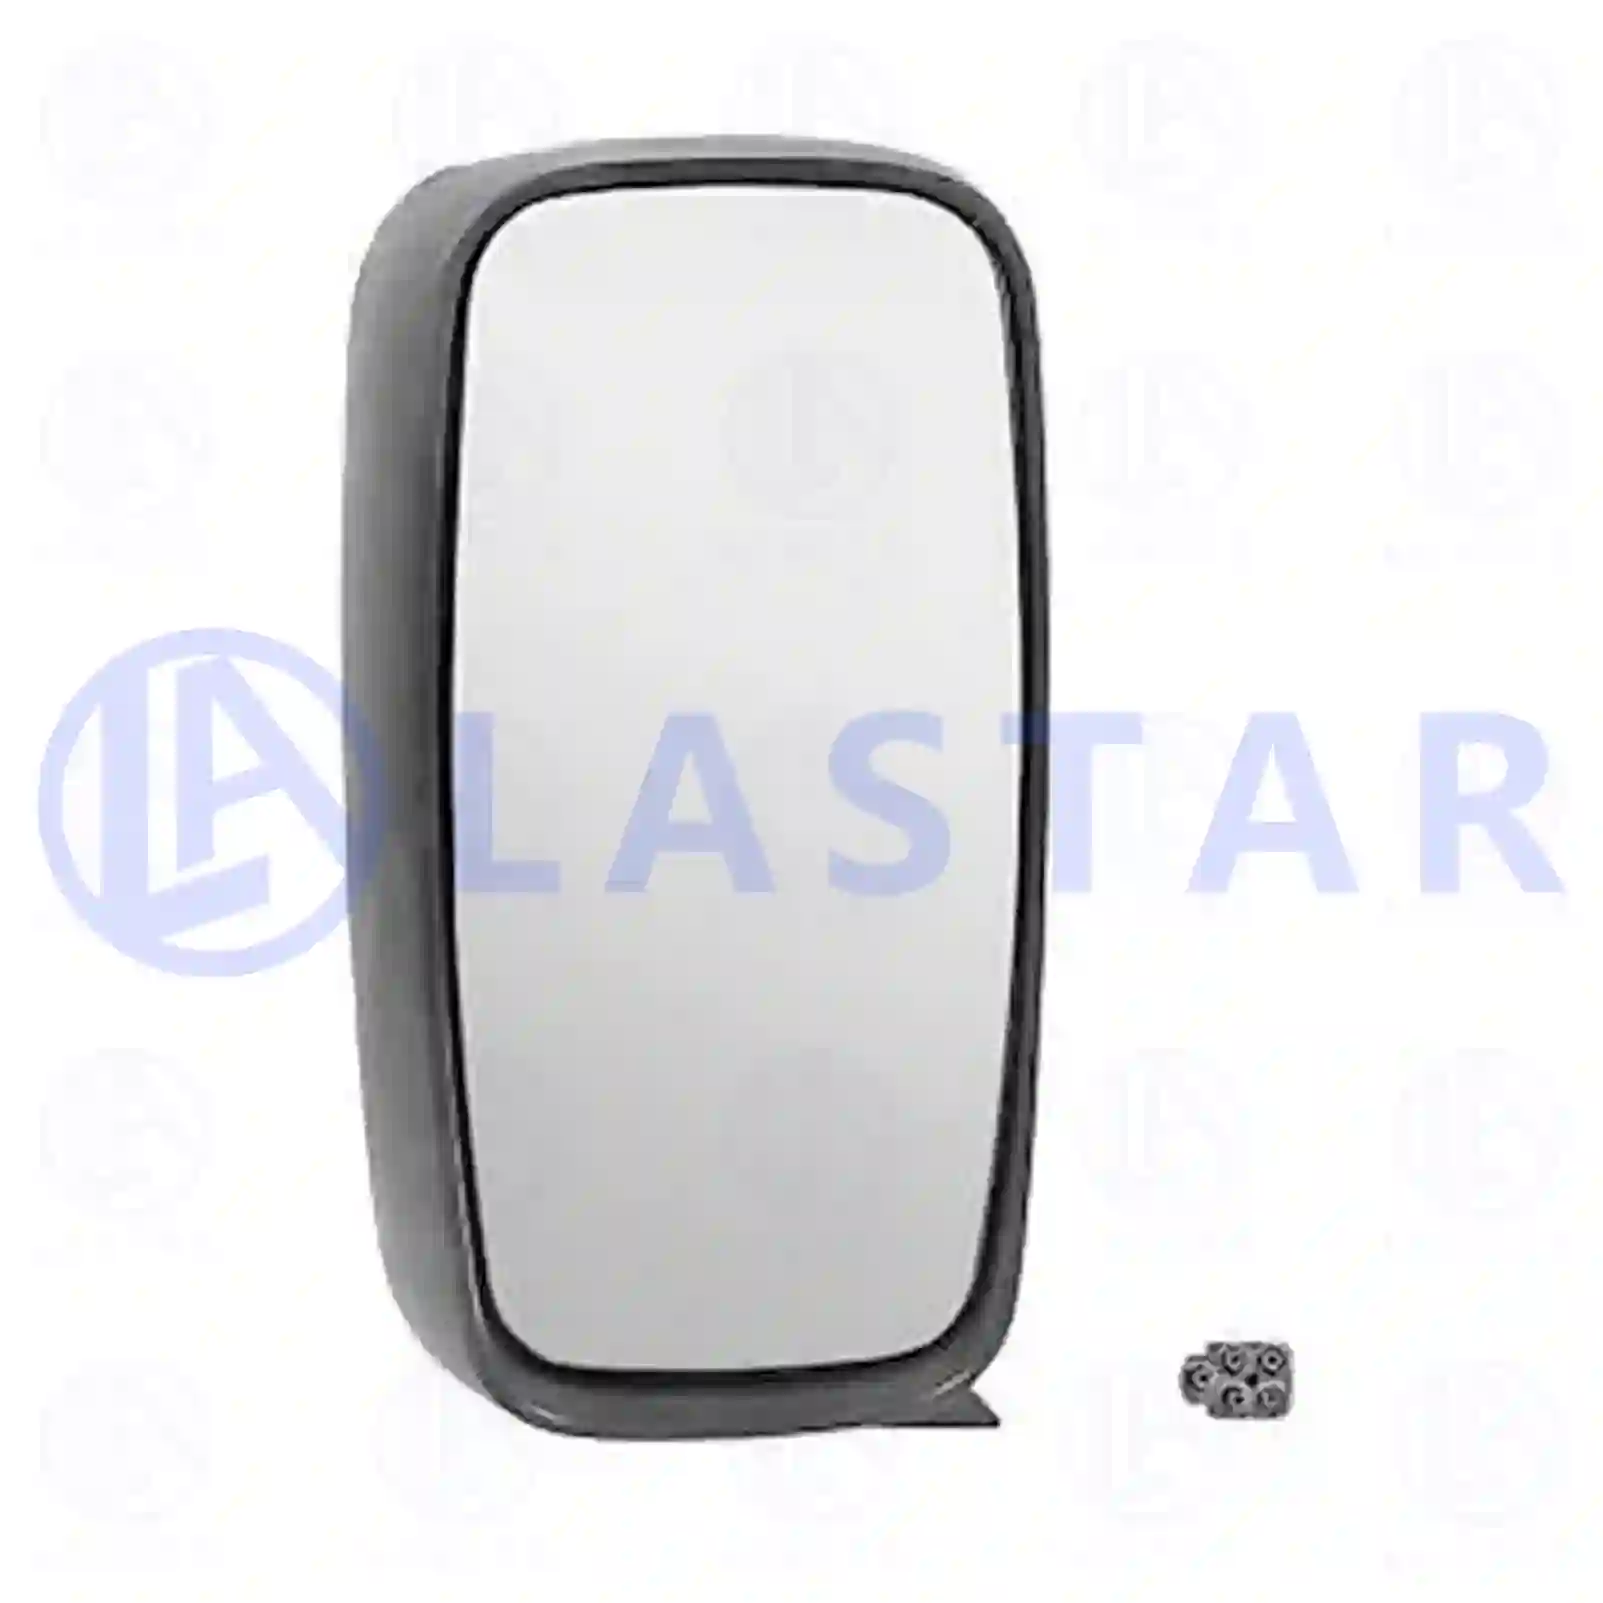 Main mirror, complete, right, without mirror arm, 77721244, 3980934S, ZG60950-0008 ||  77721244 Lastar Spare Part | Truck Spare Parts, Auotomotive Spare Parts Main mirror, complete, right, without mirror arm, 77721244, 3980934S, ZG60950-0008 ||  77721244 Lastar Spare Part | Truck Spare Parts, Auotomotive Spare Parts